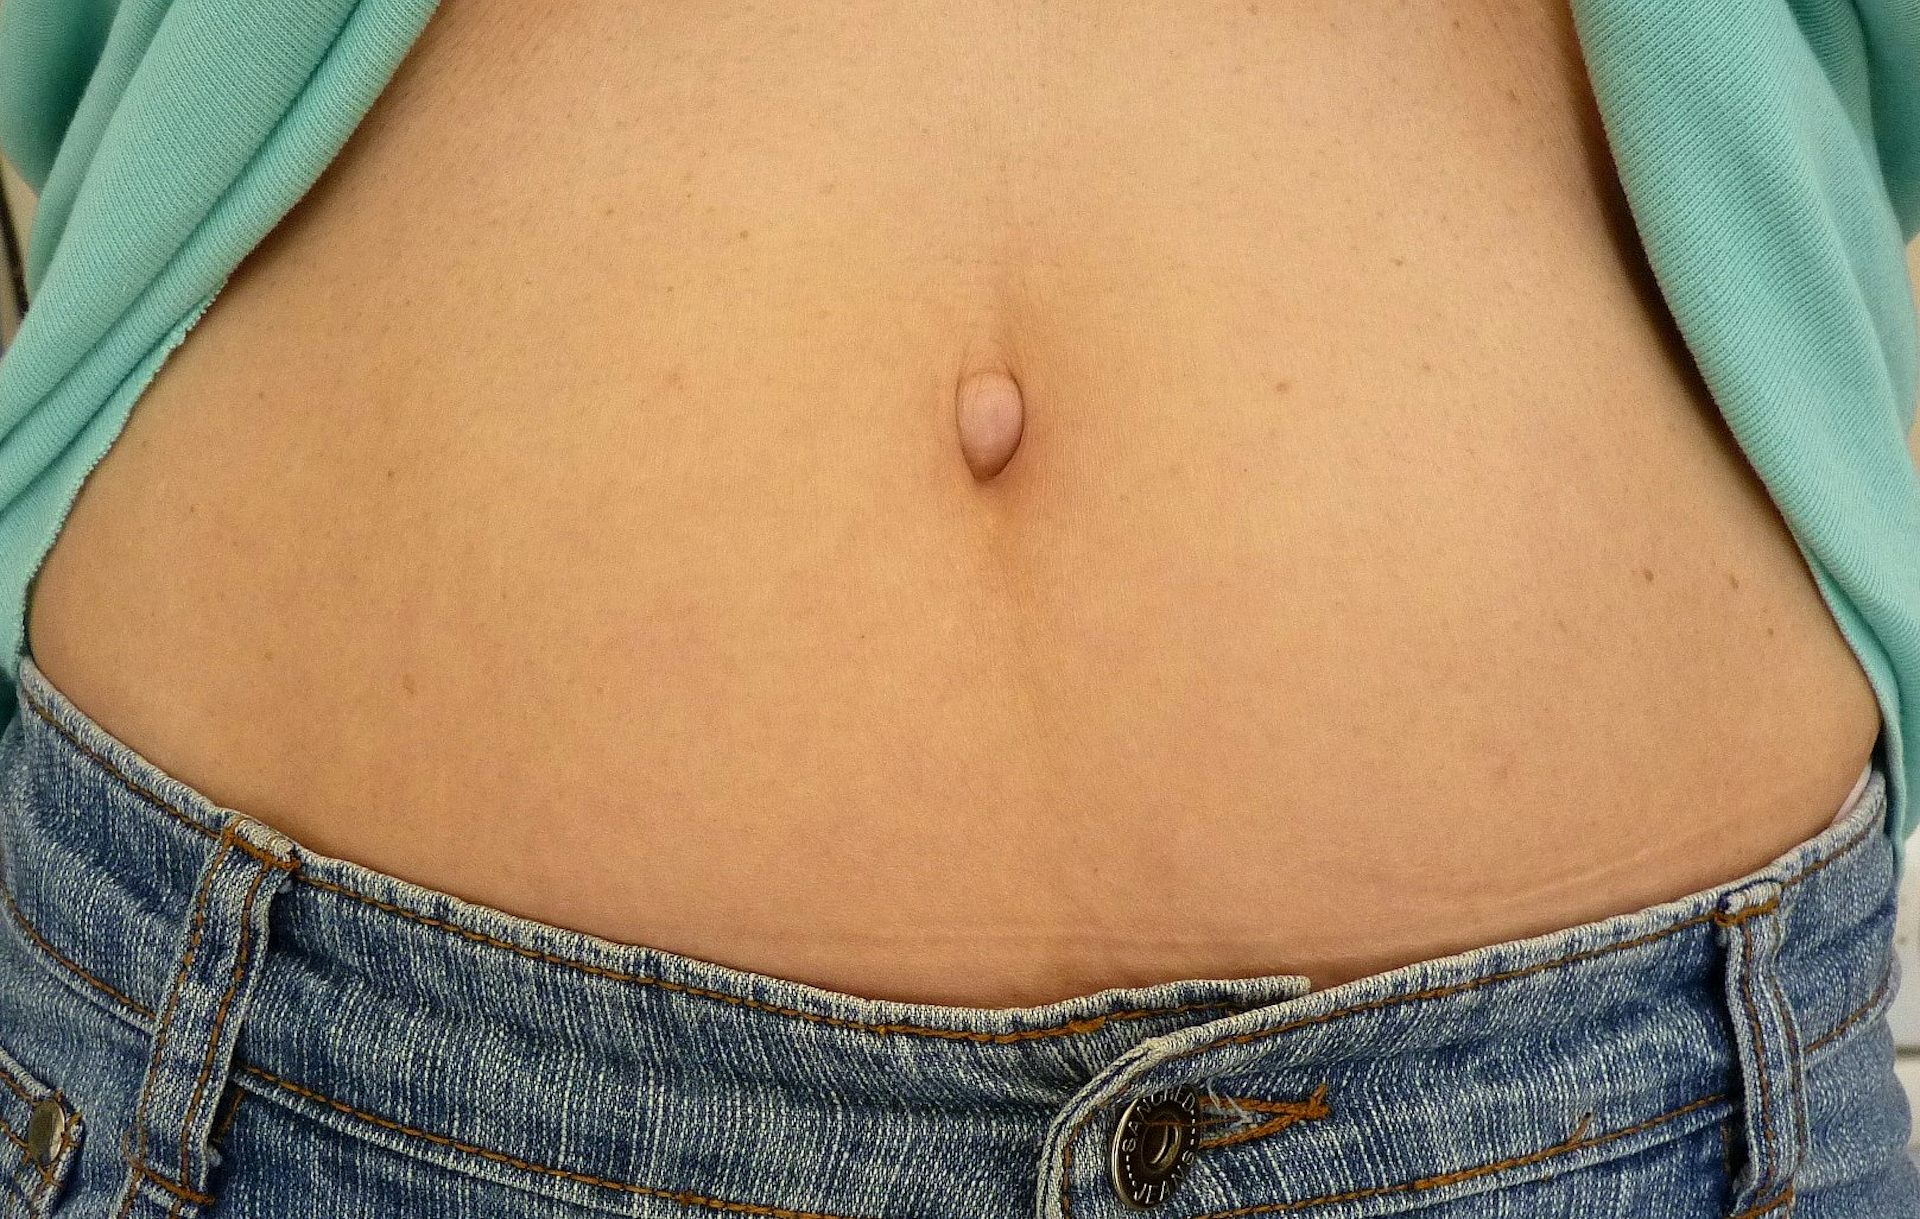 brittney rector recommends images of outie belly buttons pic